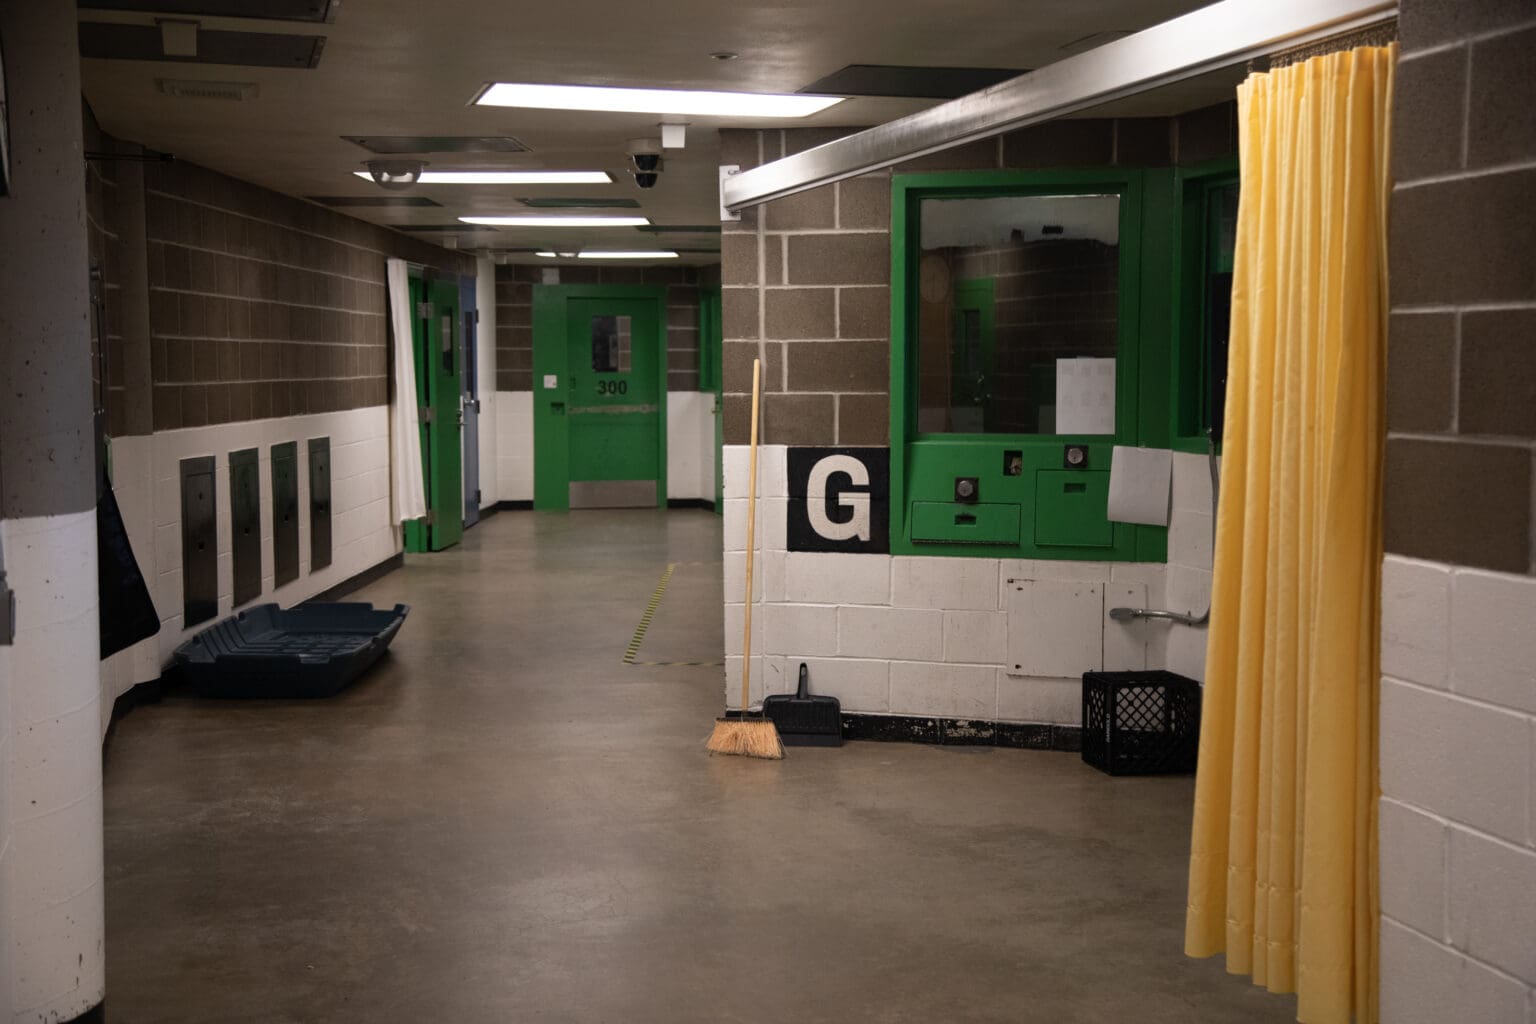 The hallway of the Whatcom County Jail in November that have green doors leading to inmate cells.